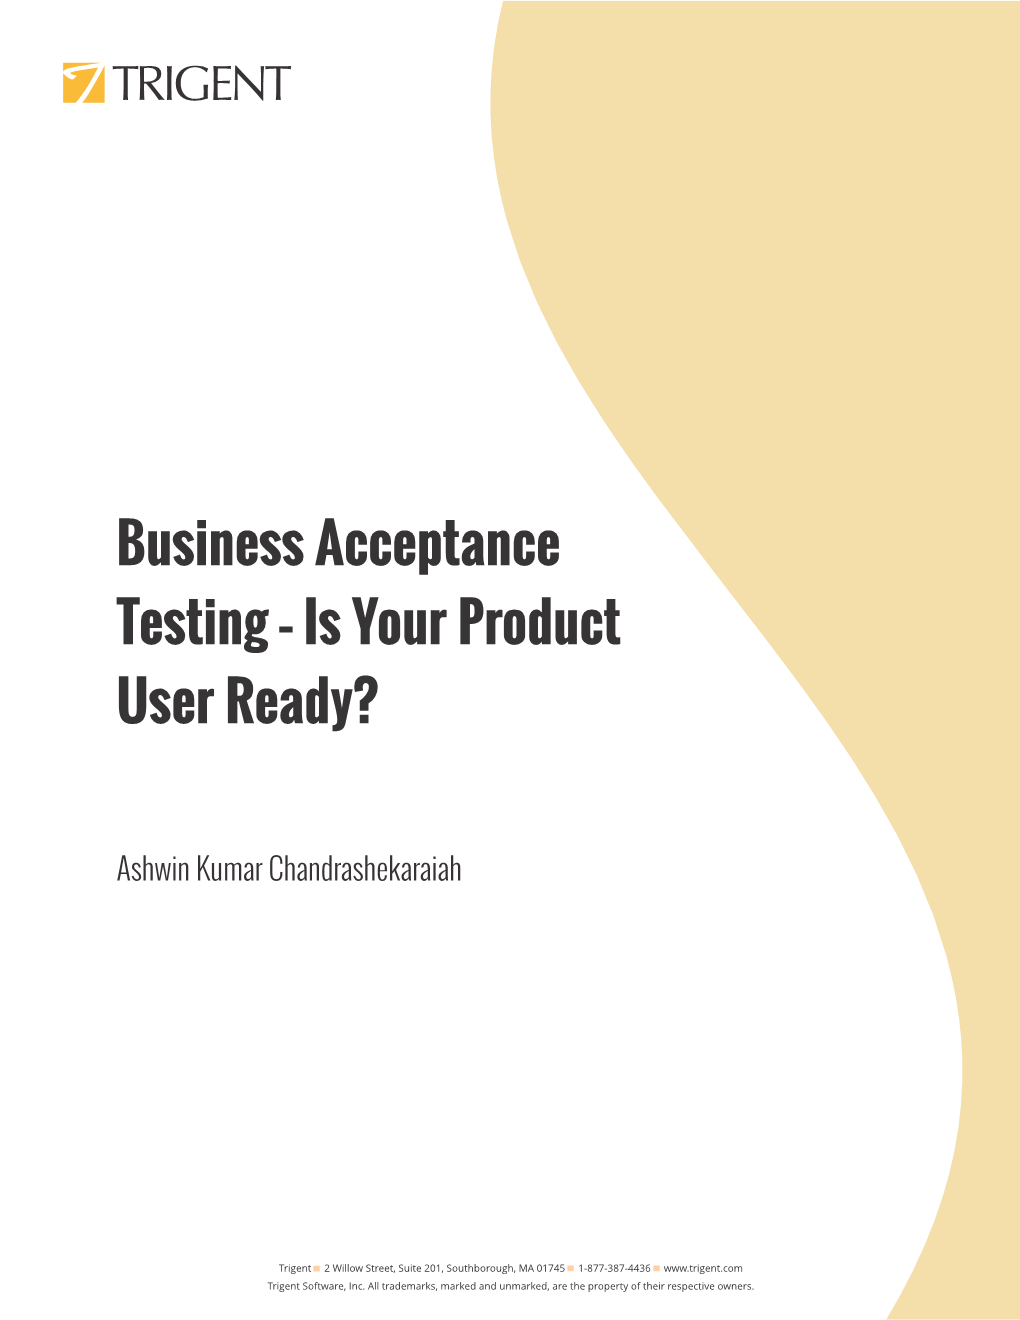 Business Acceptance Testing – Is Your Product User Ready?